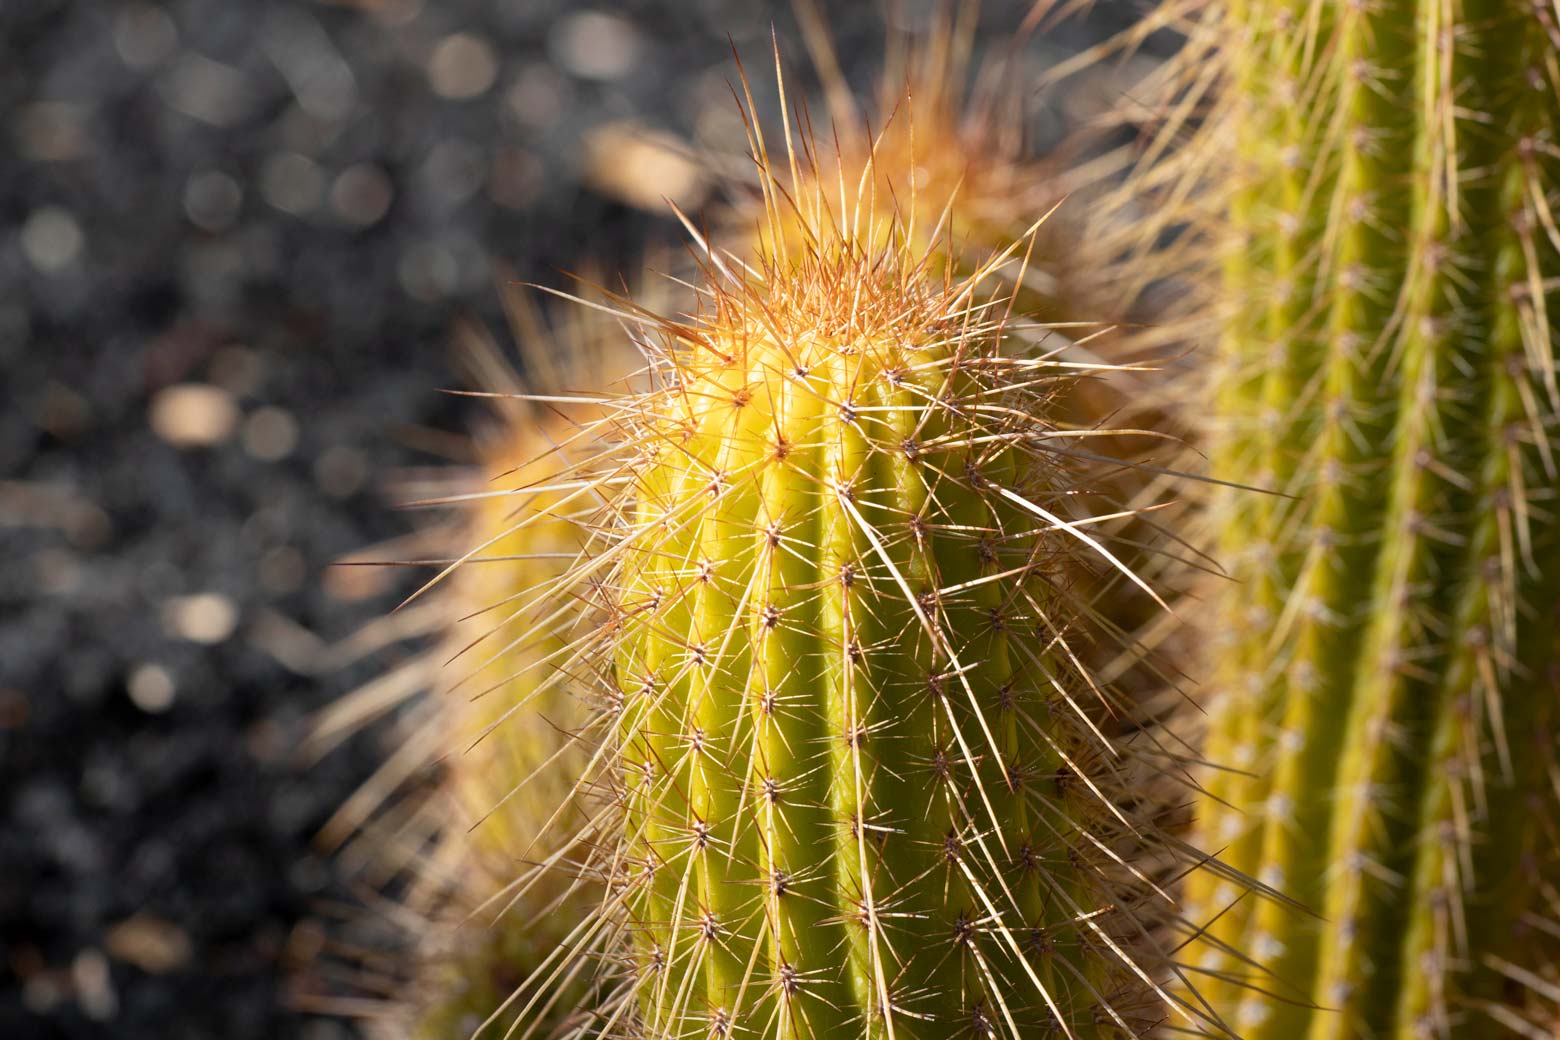 A close-up of Torch cactus.